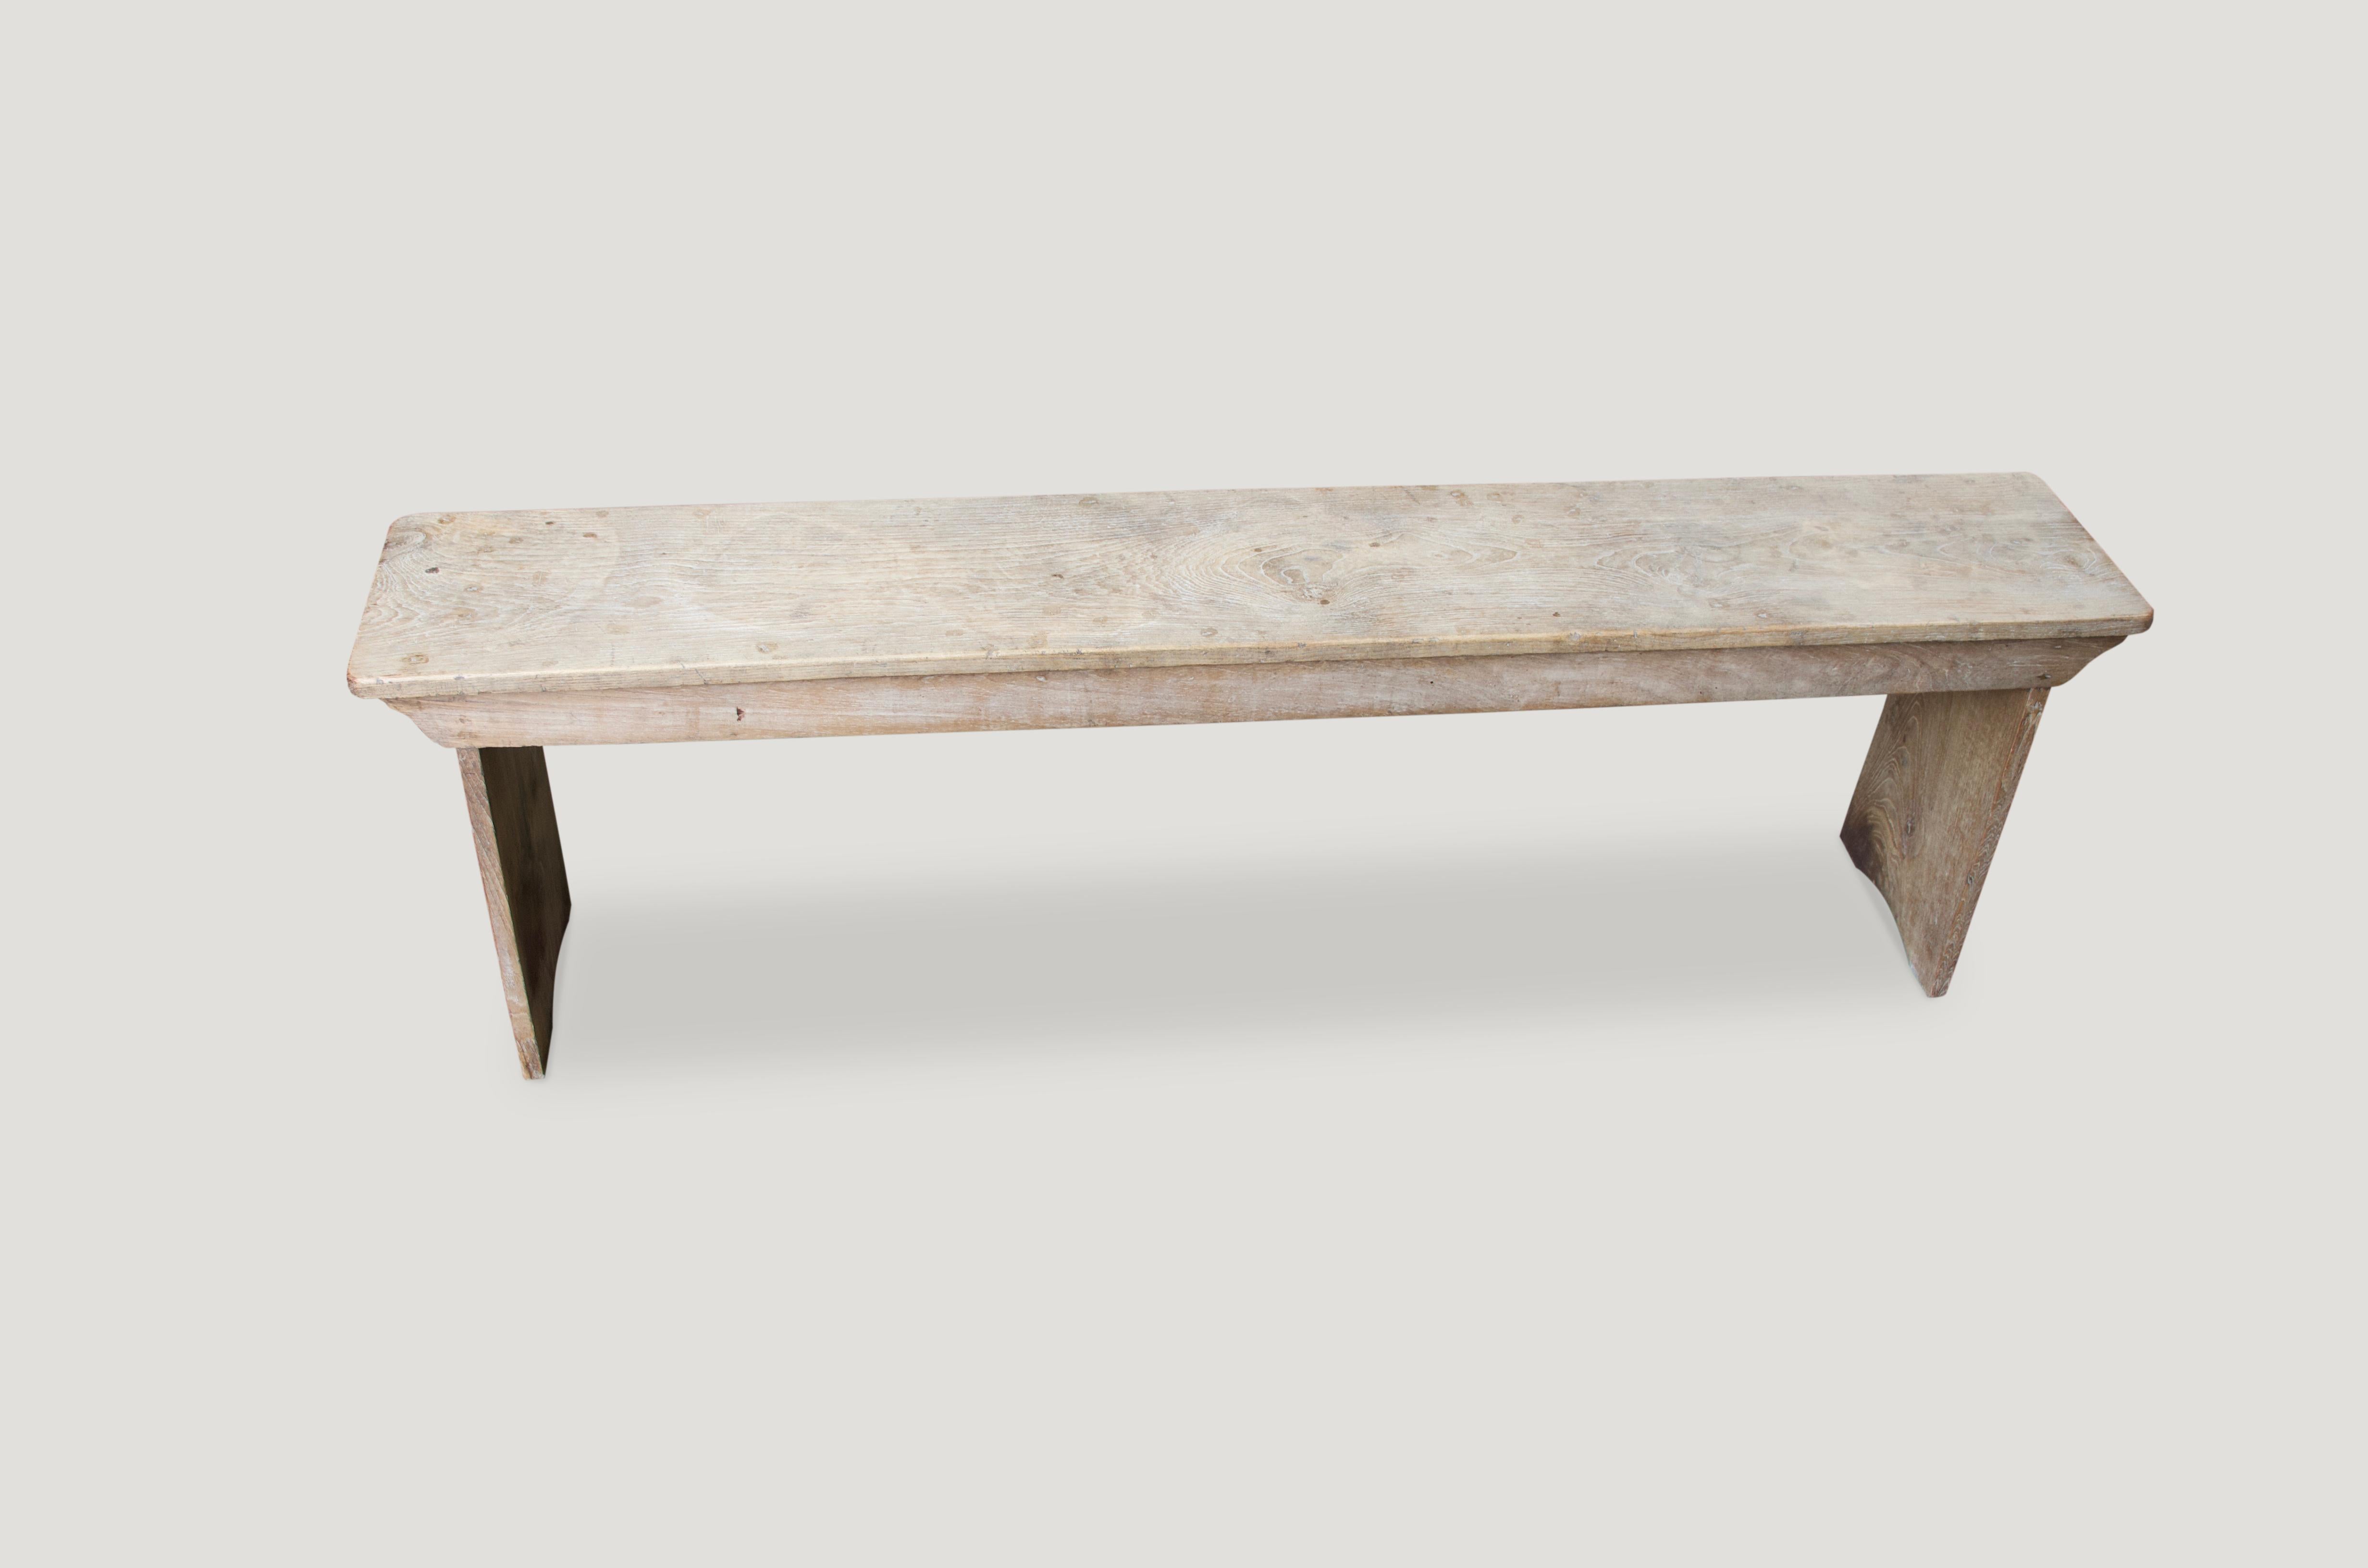 Antique Wabi Sabi teak wood bench. Perfect for inside or outside living.

This bench was sourced in the spirit of wabi-sabi, a Japanese philosophy that beauty can be found in imperfection and impermanence. It’s a beauty of things modest and